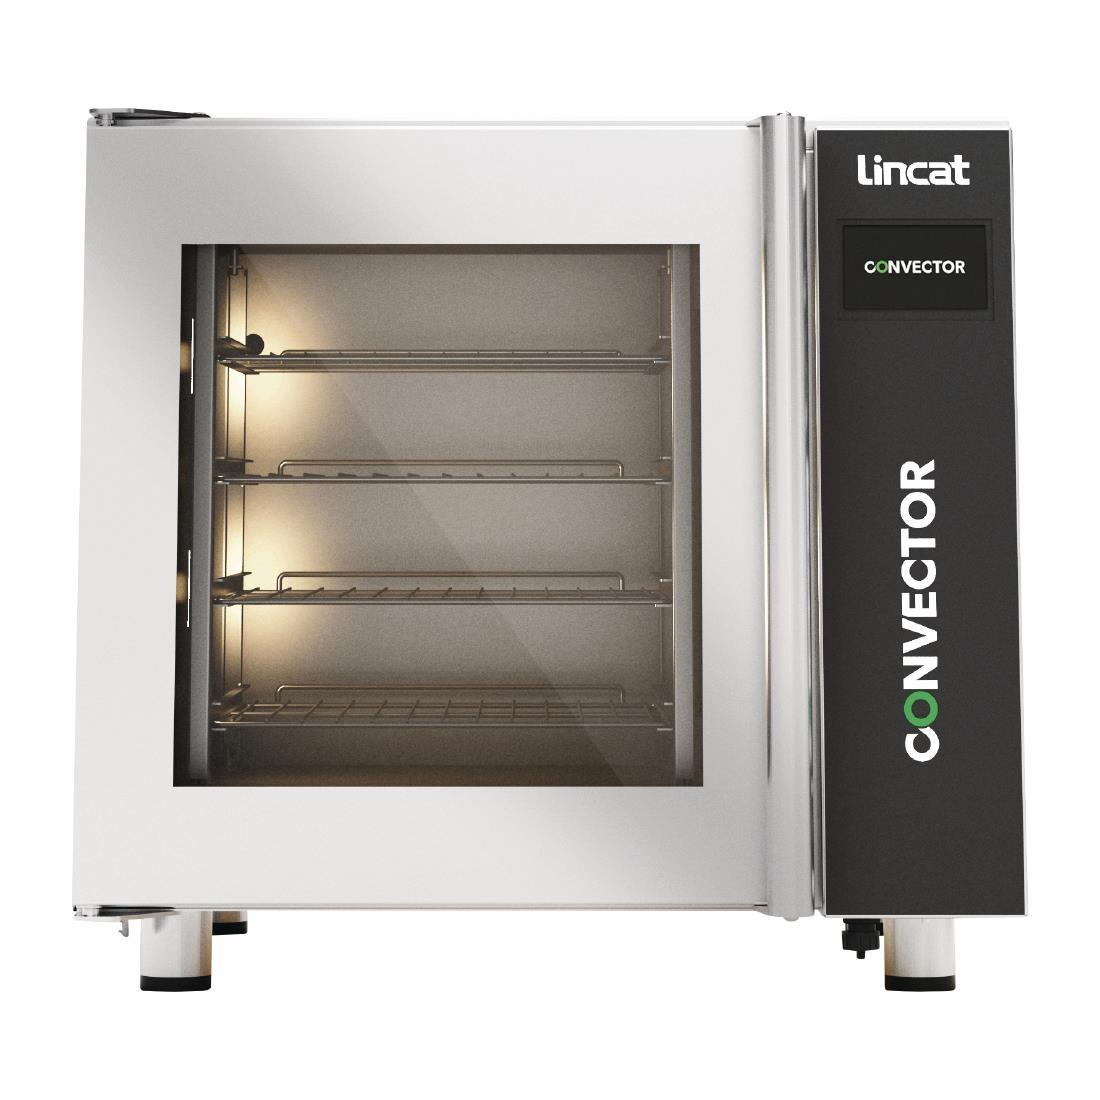 Lincat Convector Touch Electric Counter-top Convection Oven CO343T